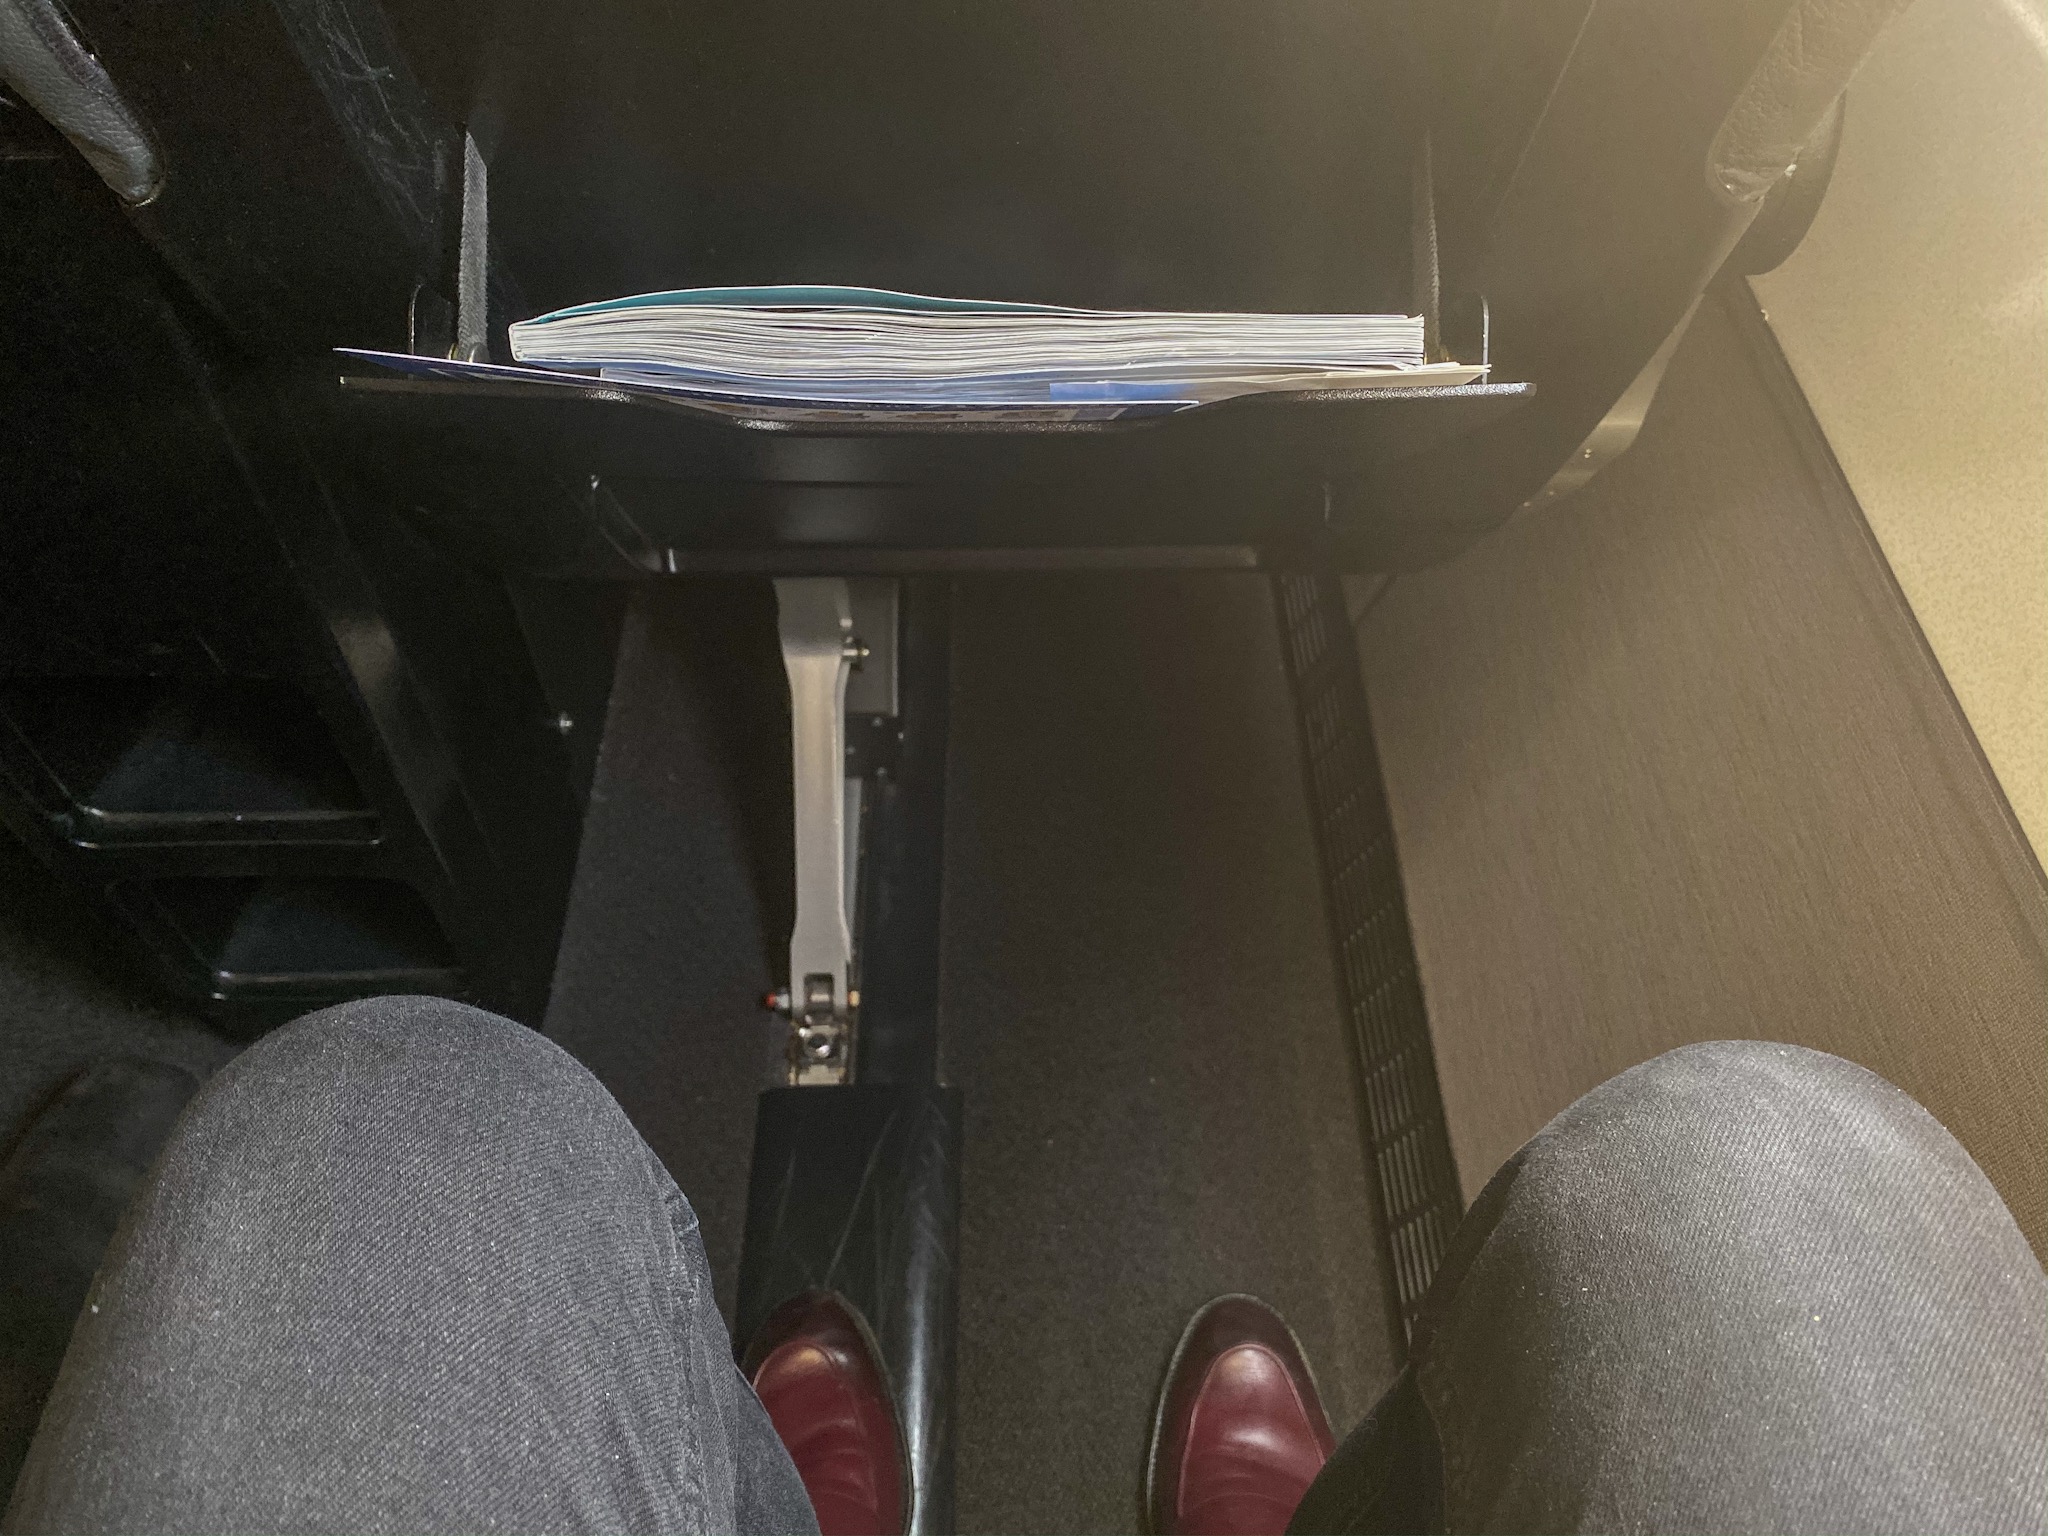 a person's legs and a folder in a seat